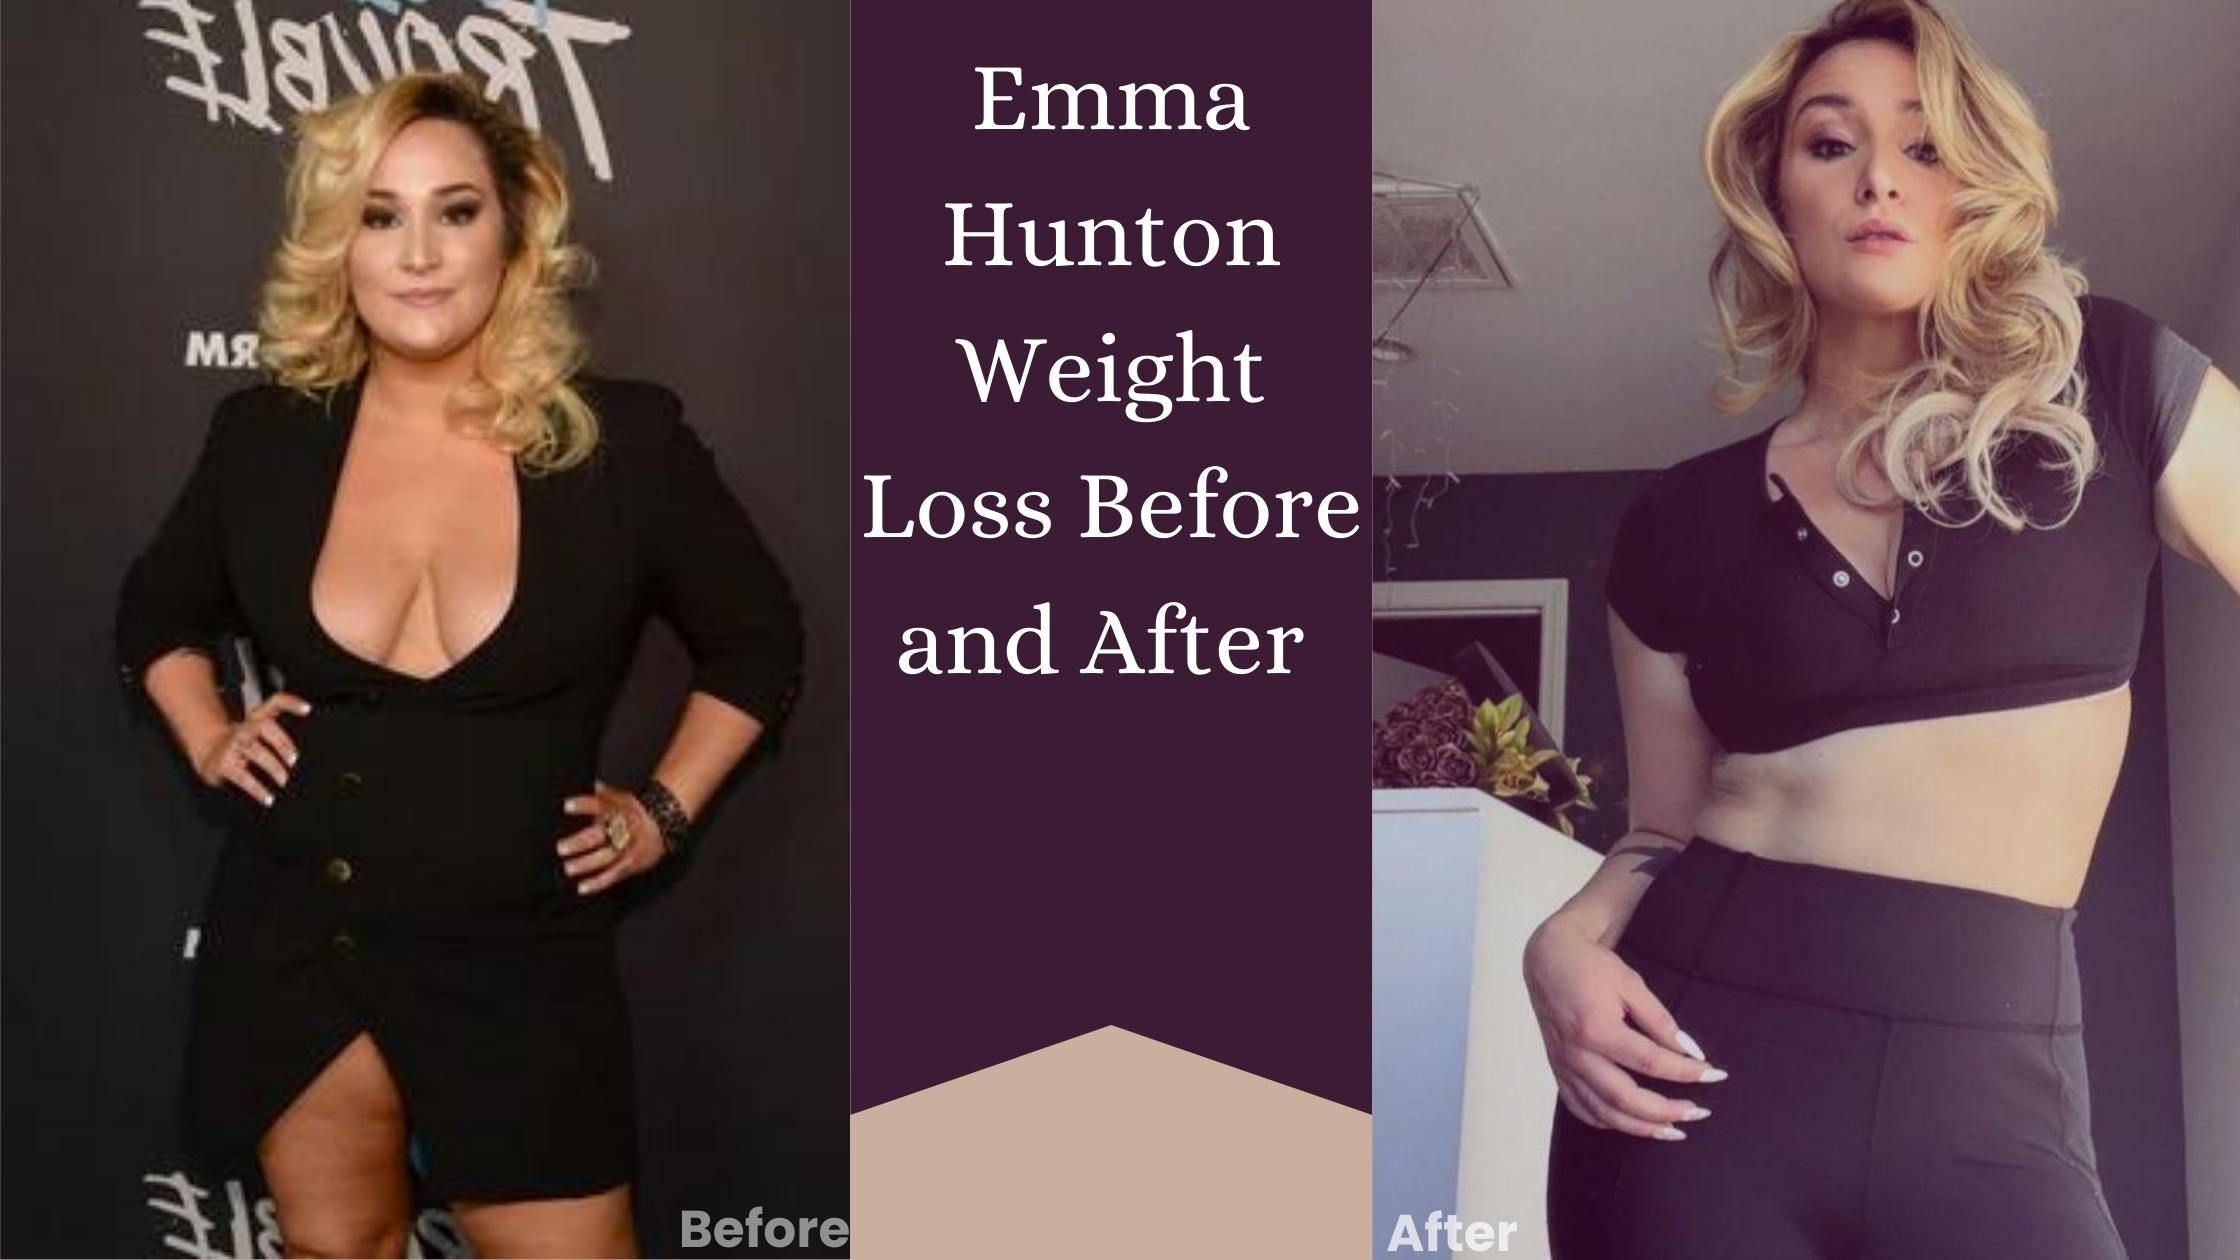 Emma Hunton Weight Loss Before and After